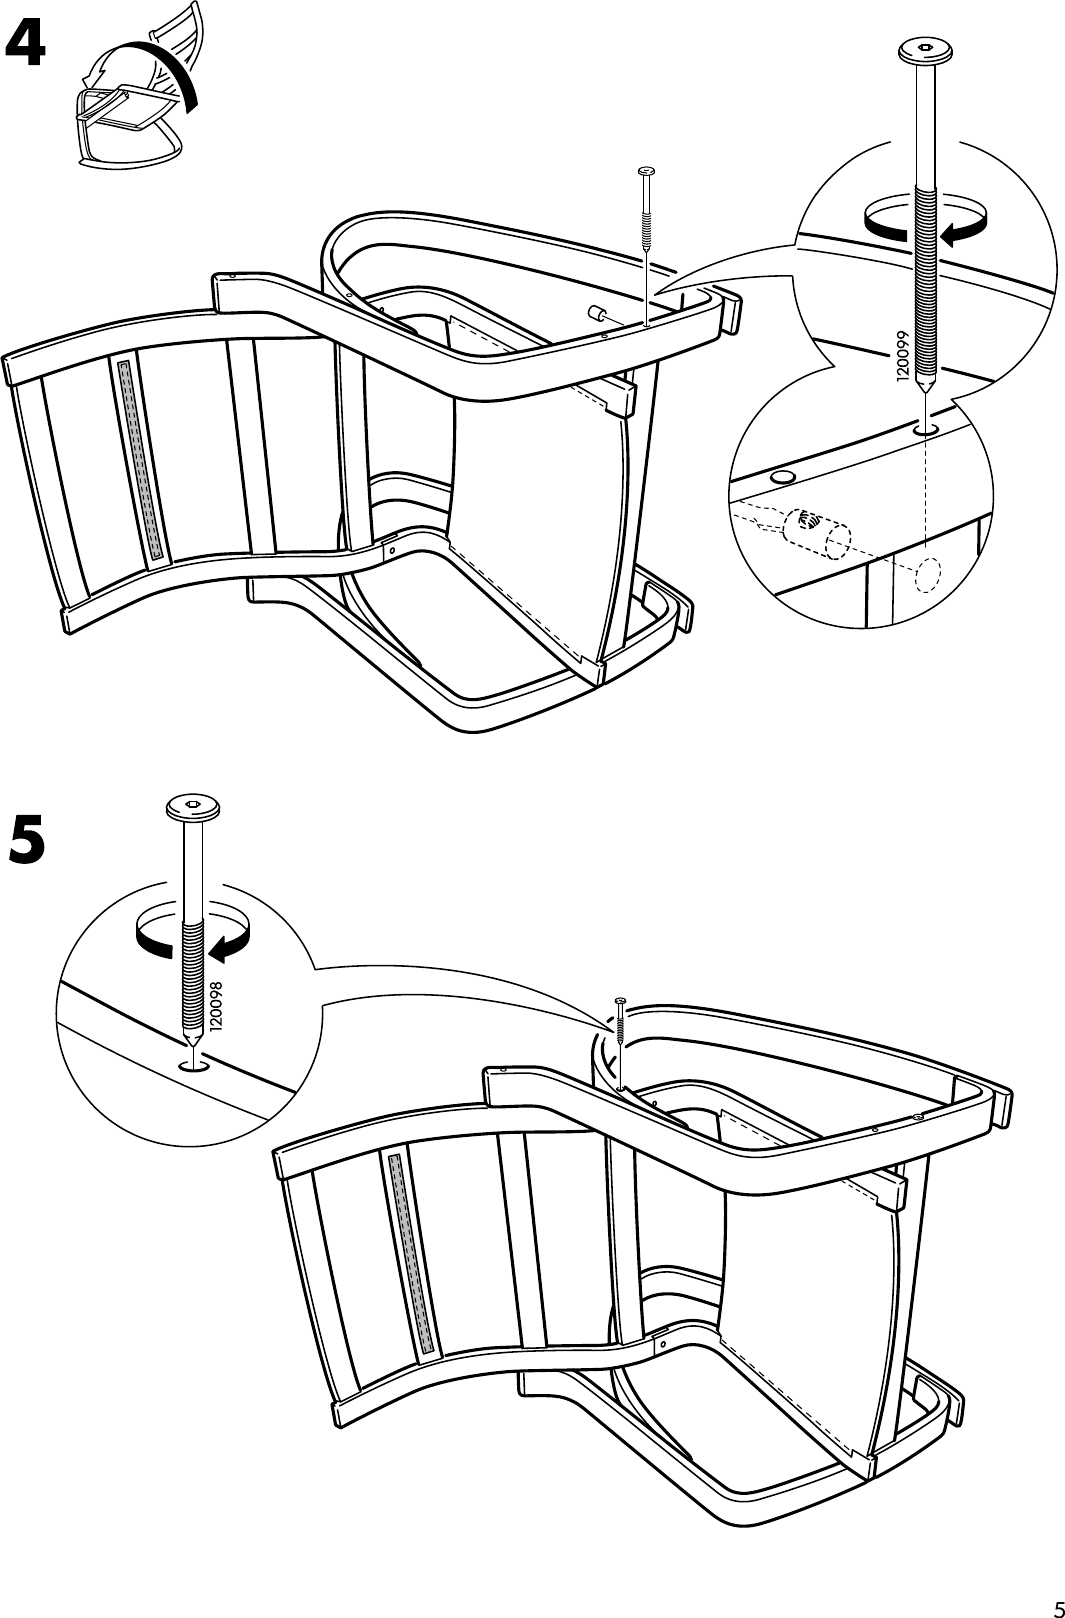 Page 5 of 8 - Ikea Ikea-Poang-Rocking-Chair-Frame-Assembly-Instruction